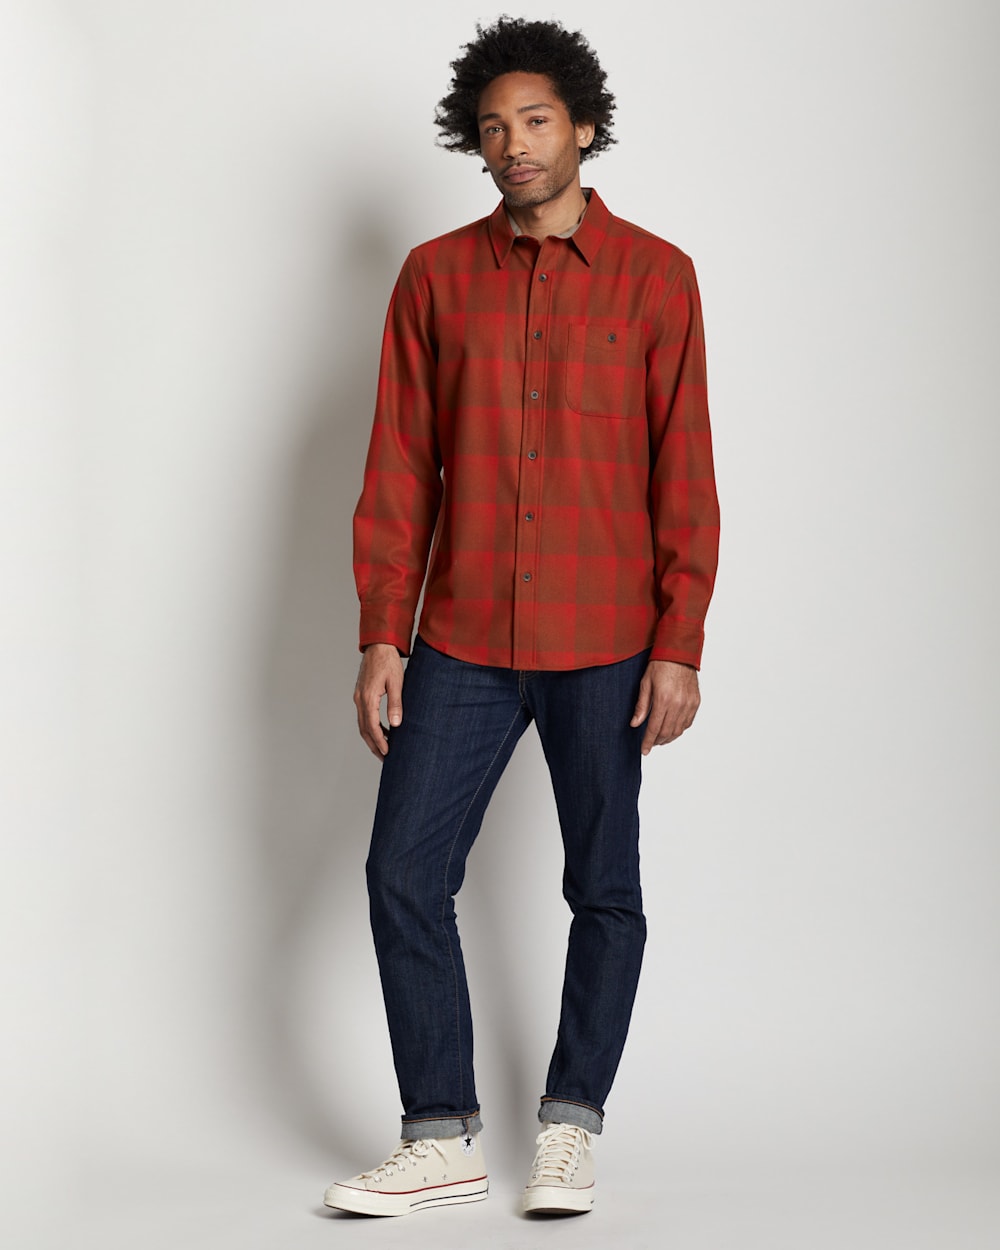 ALTERNATE VIEW OF MEN'S PLAID TRAIL SHIRT IN RED/COPPER OMBRE image number 2